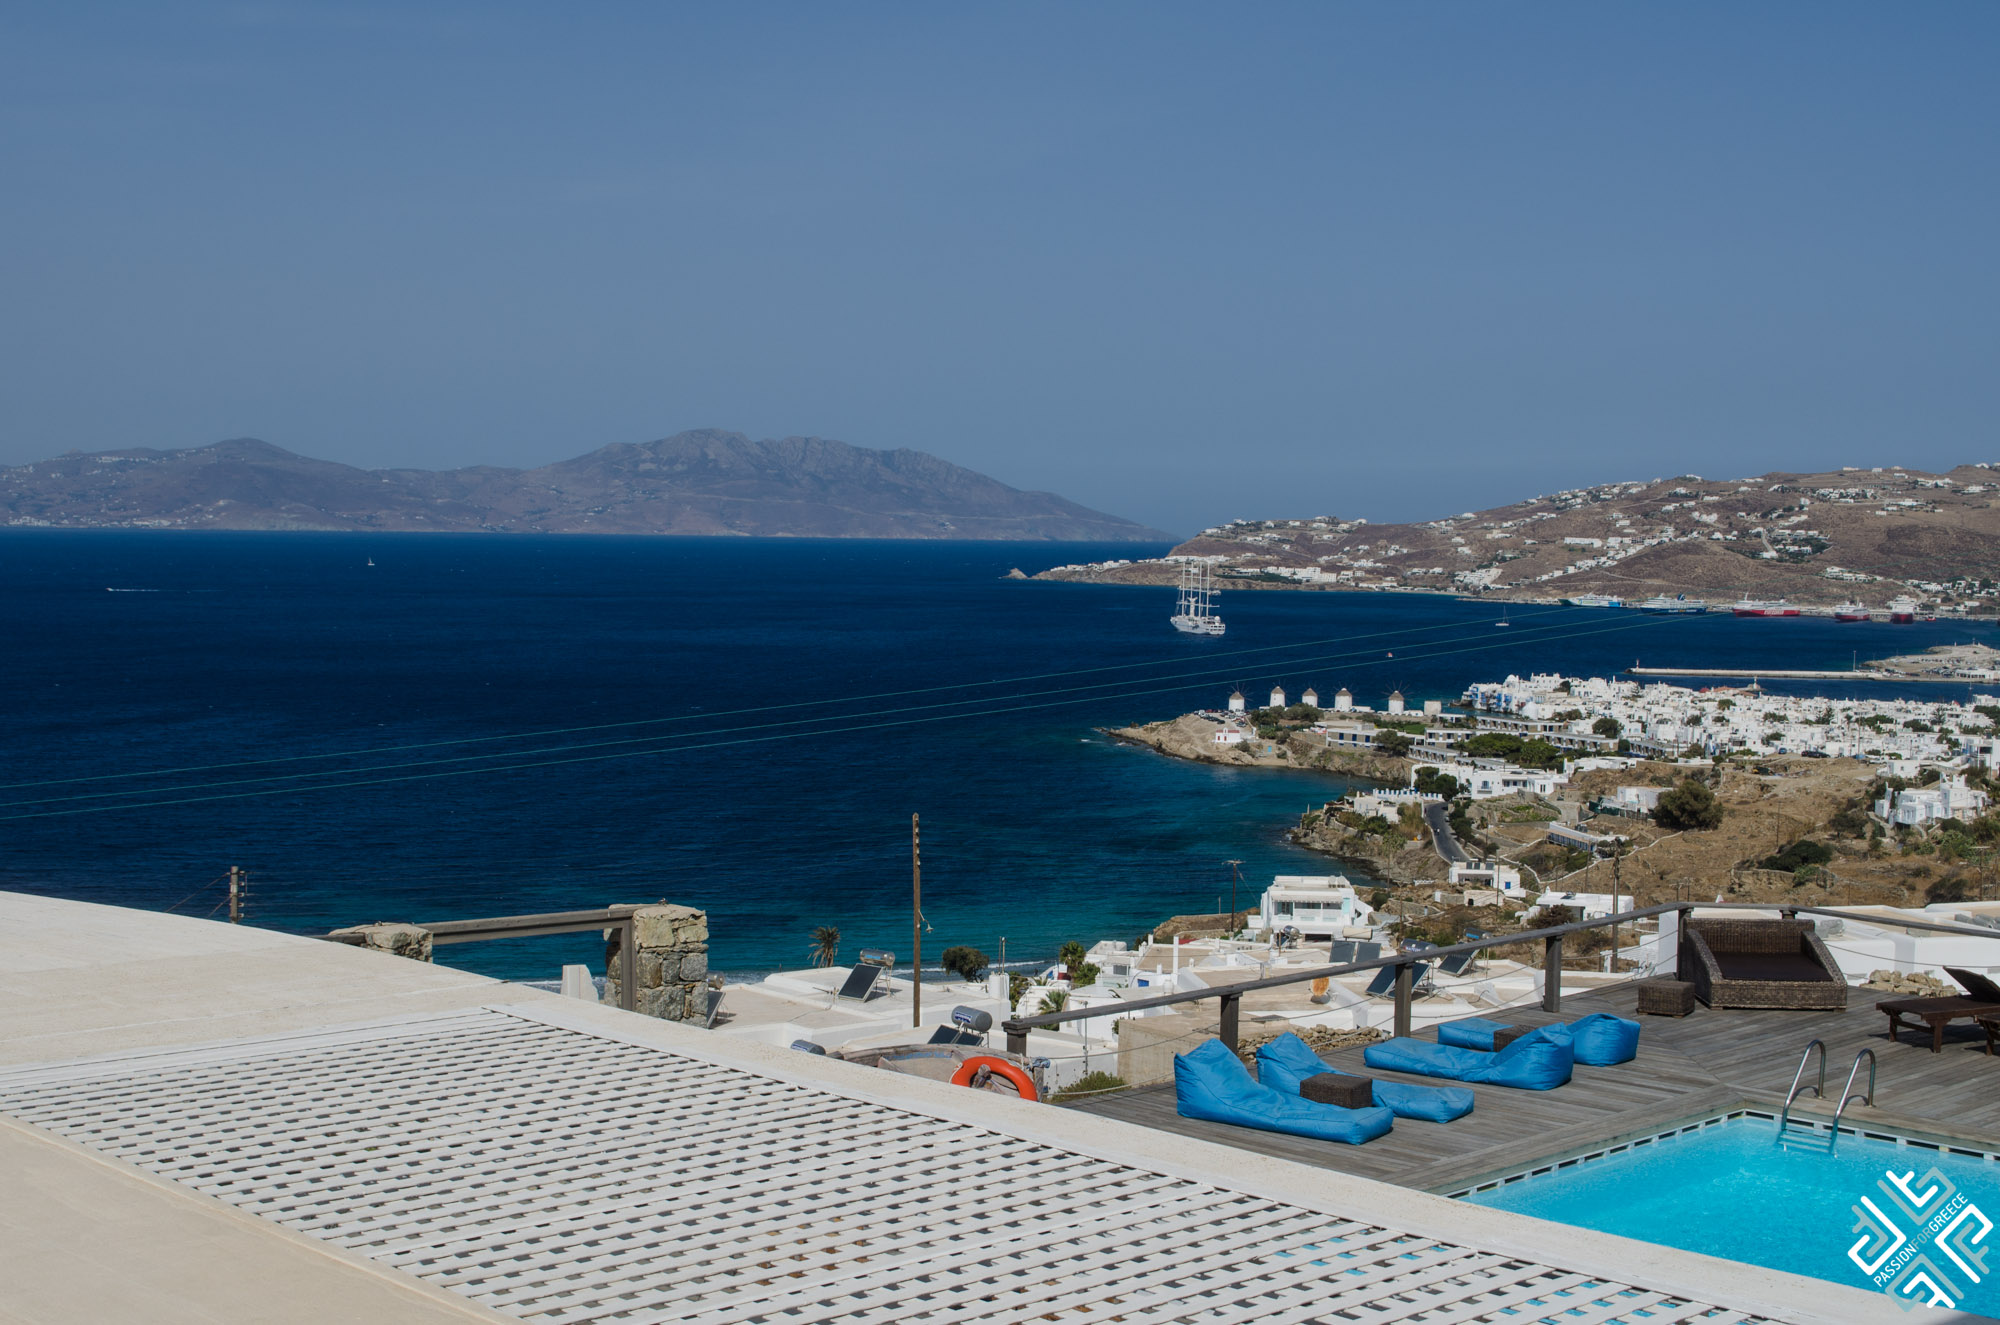 Tharroe of Mykonos: Charming Boutique Hotel - Passion for Hospitality